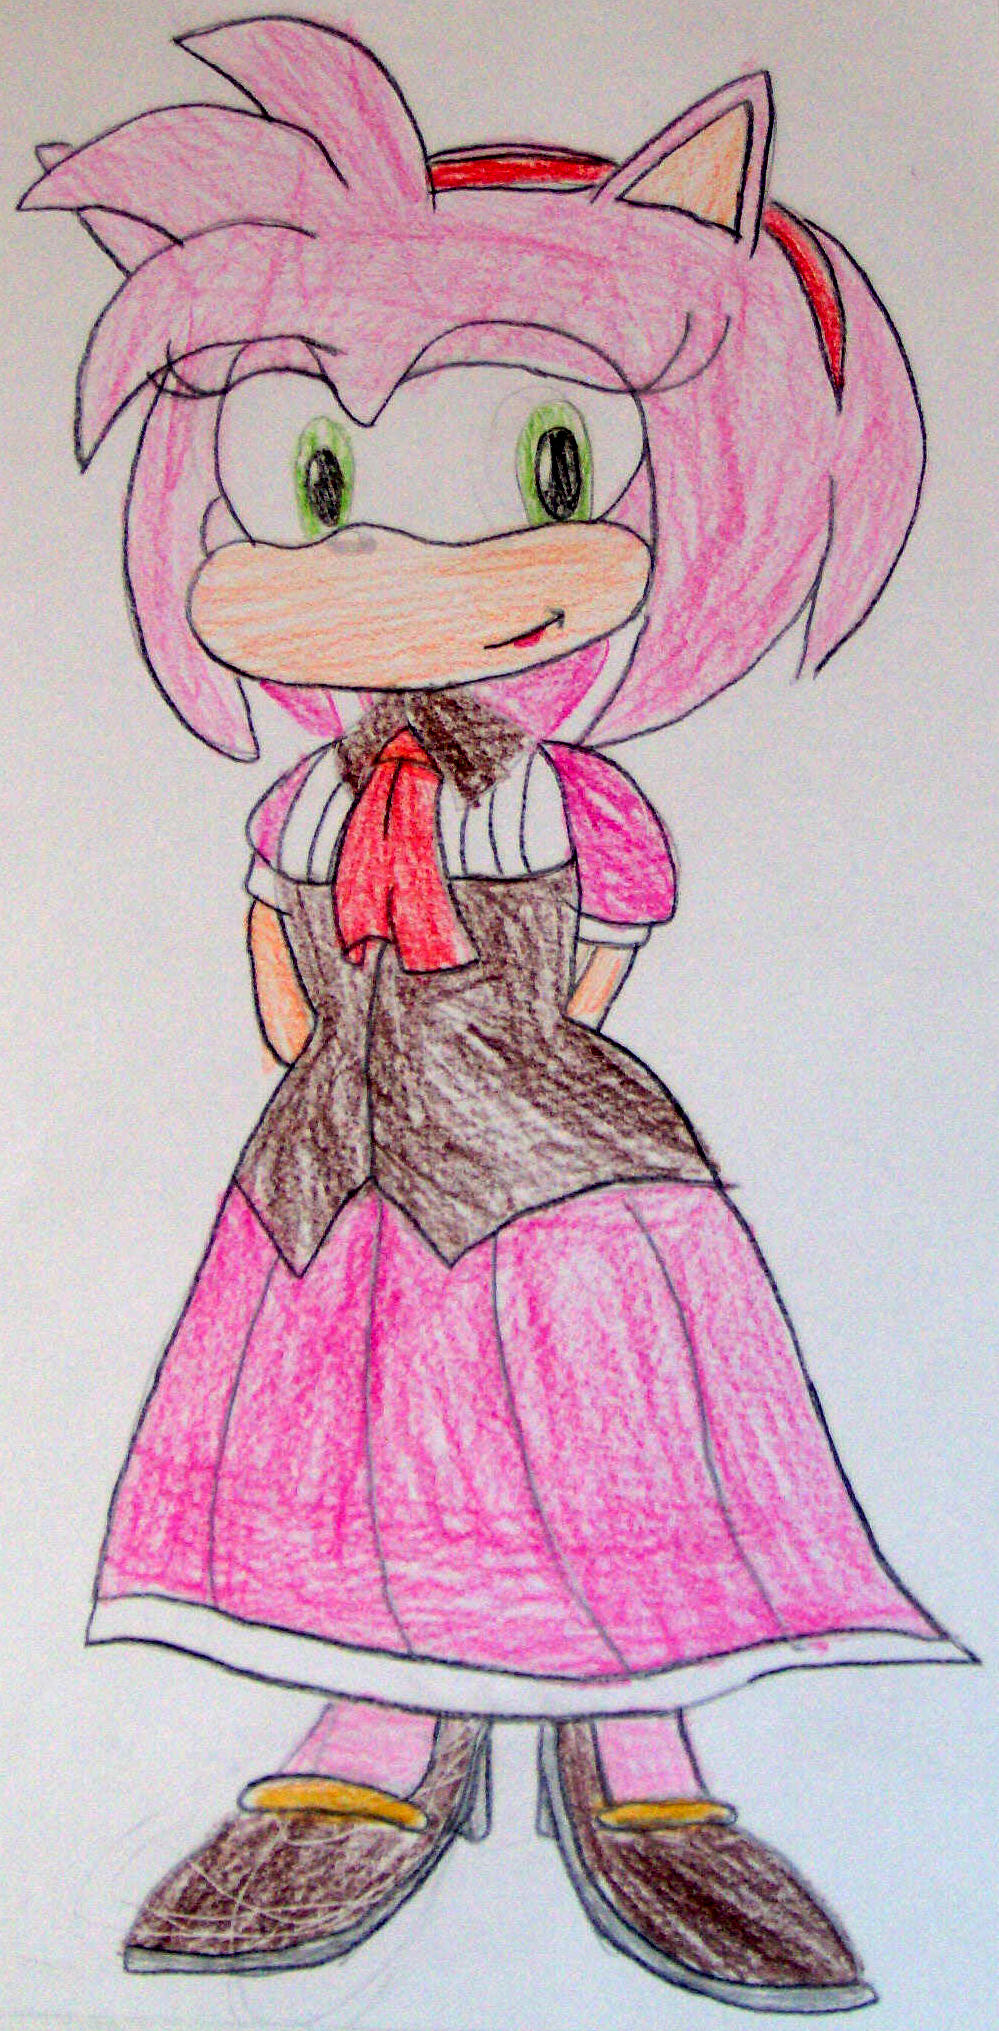 Amy in Vanilla's Outfit by germanname